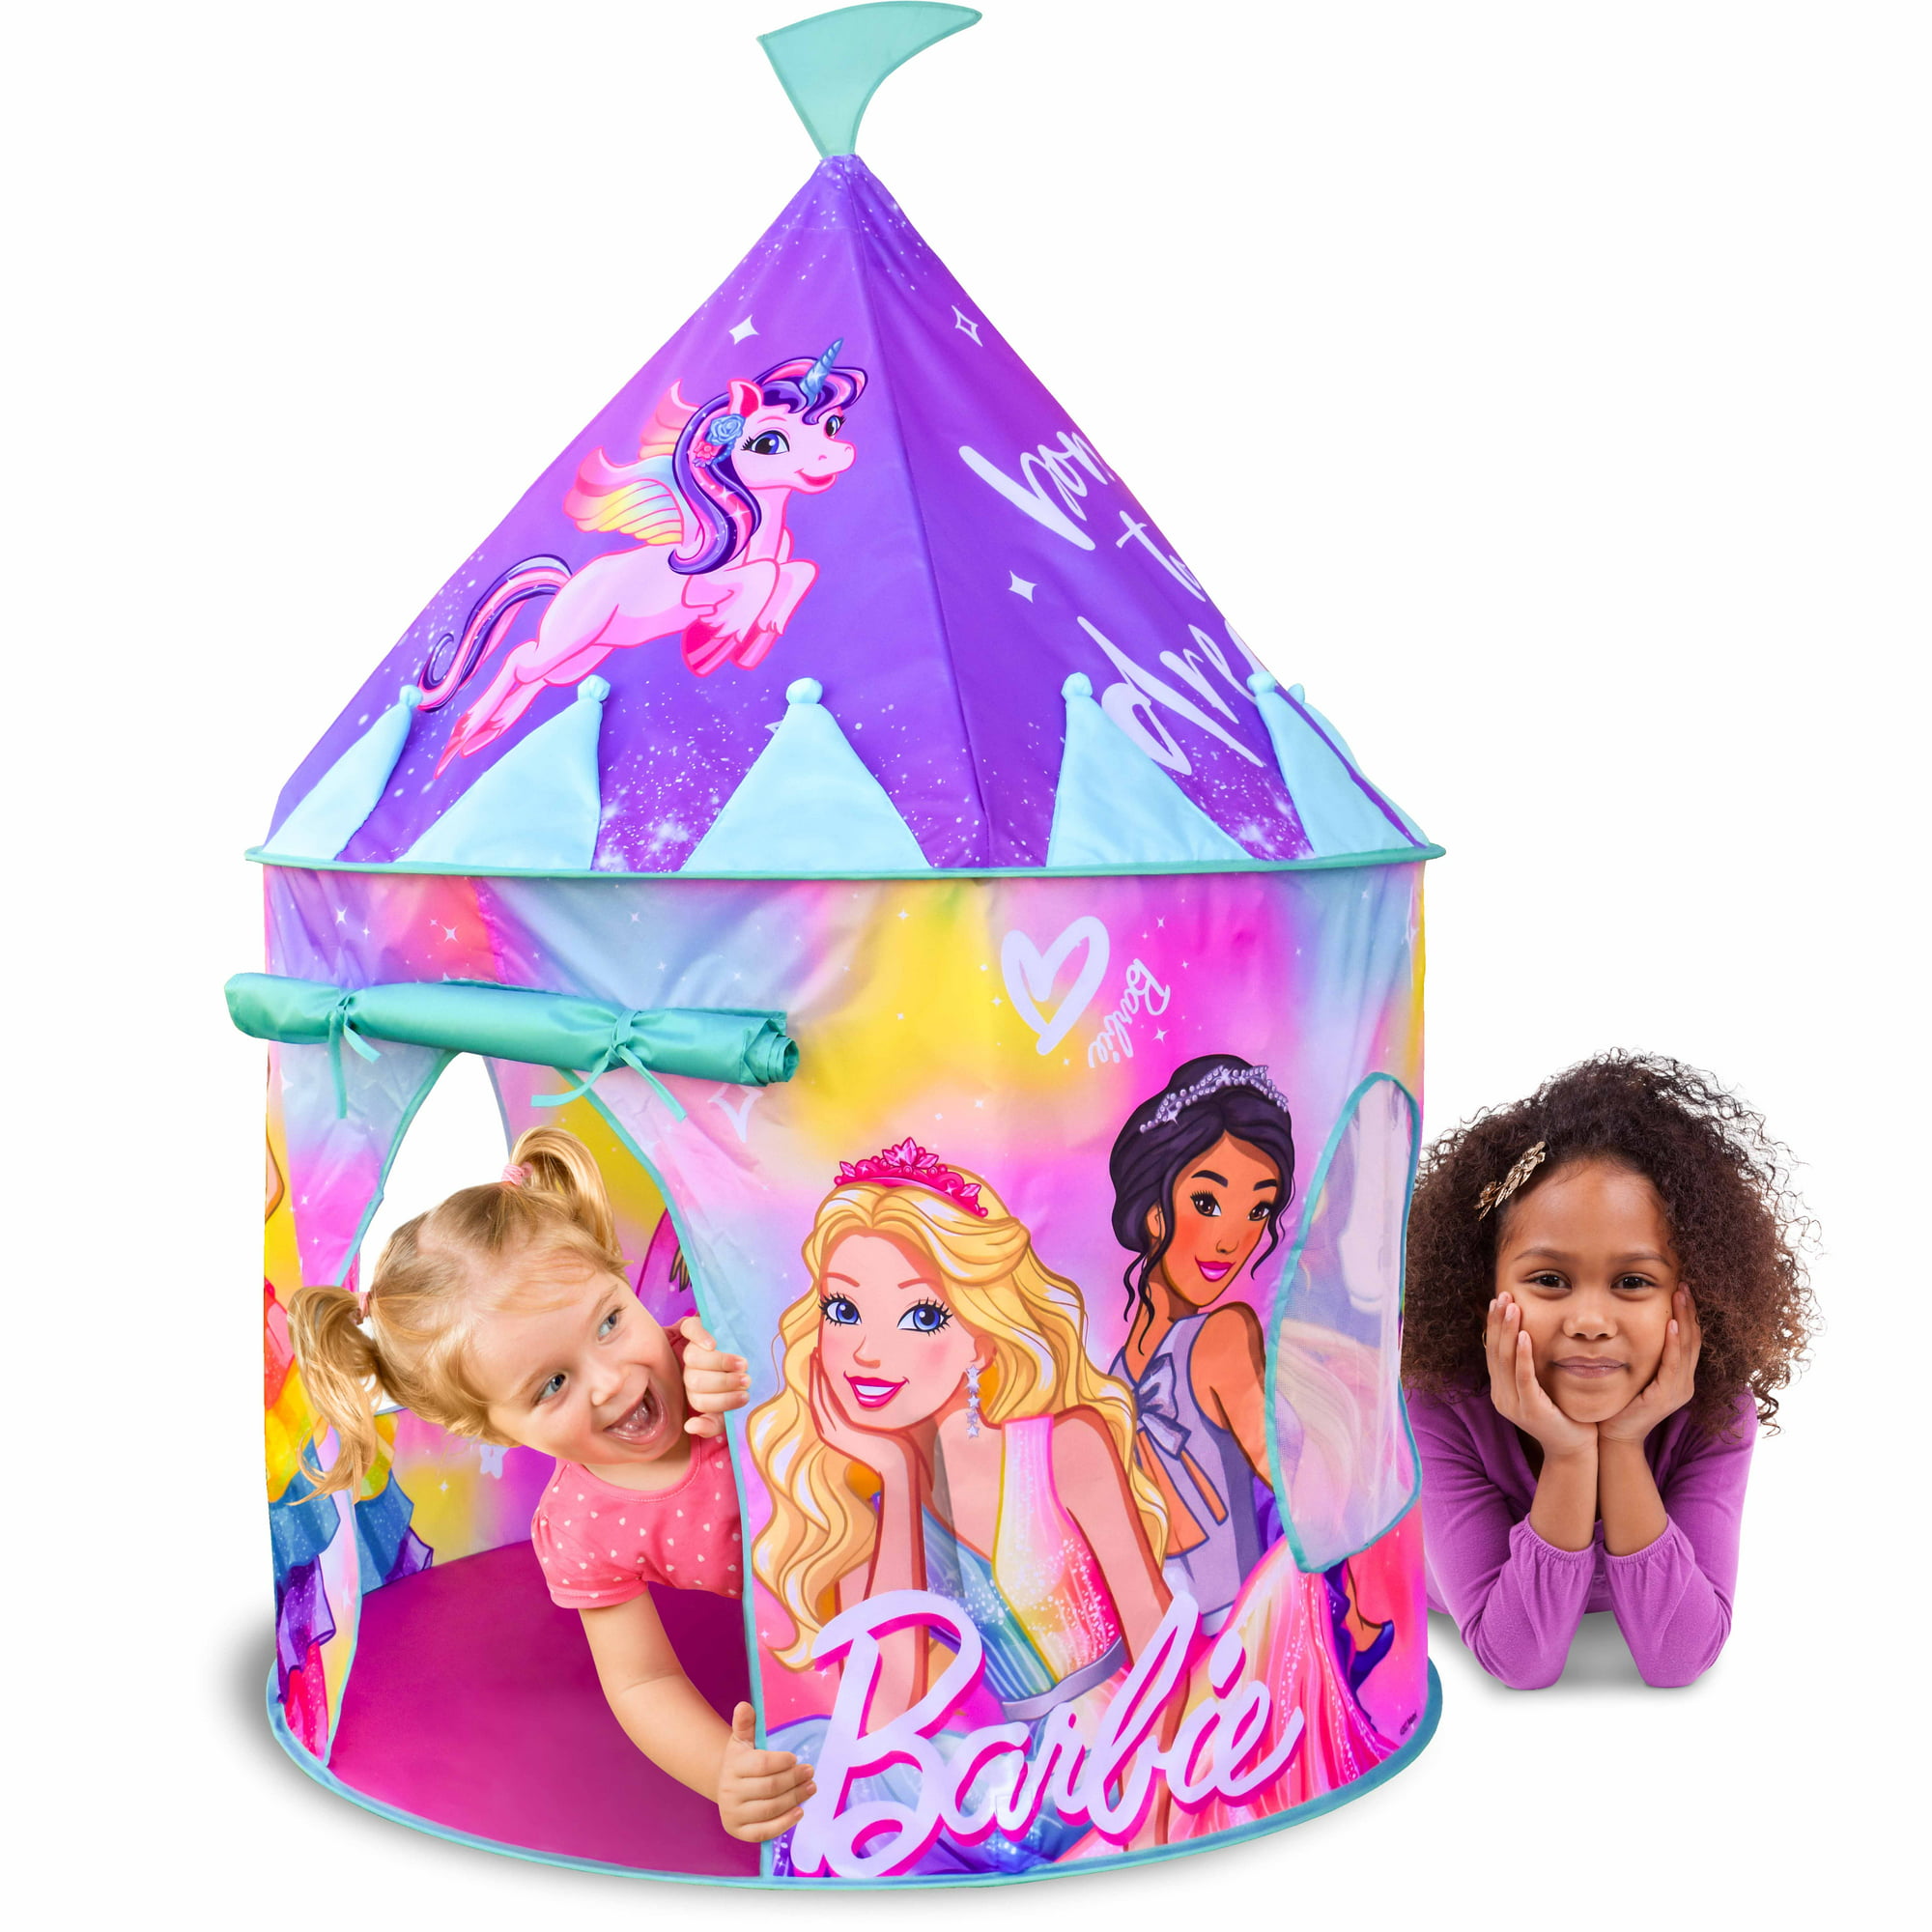 Barbie Pop Up Castle - Dreamtopia Pink Princess Play Tent for Kids Folds Into Carrying Case